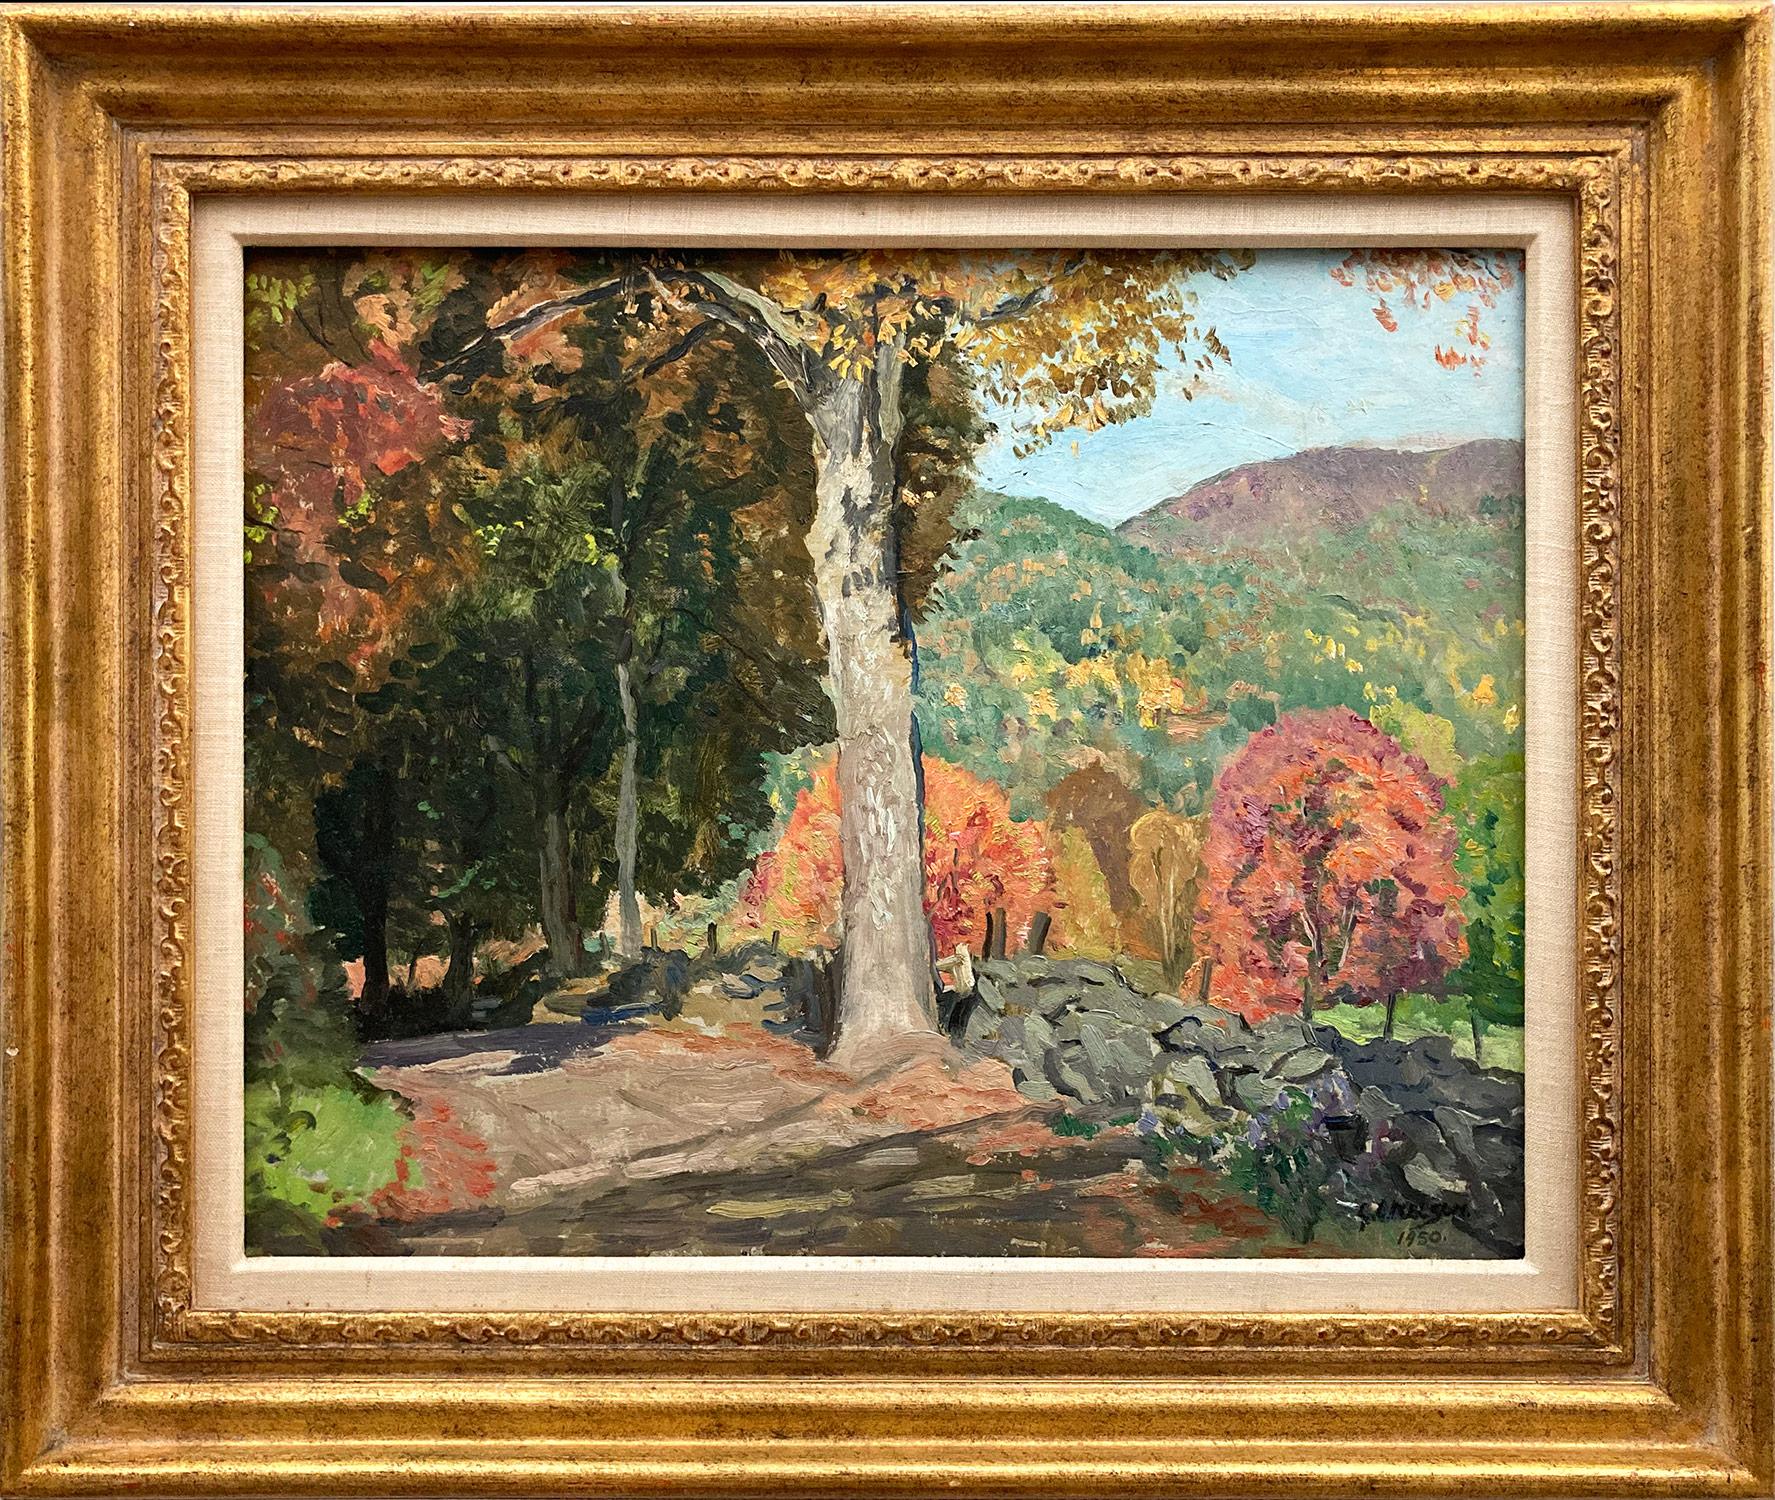 George Lawrence Nelson Landscape Painting - "Autumn" Colorful Mid-20th Century American Oil Painting Landscape with Tress